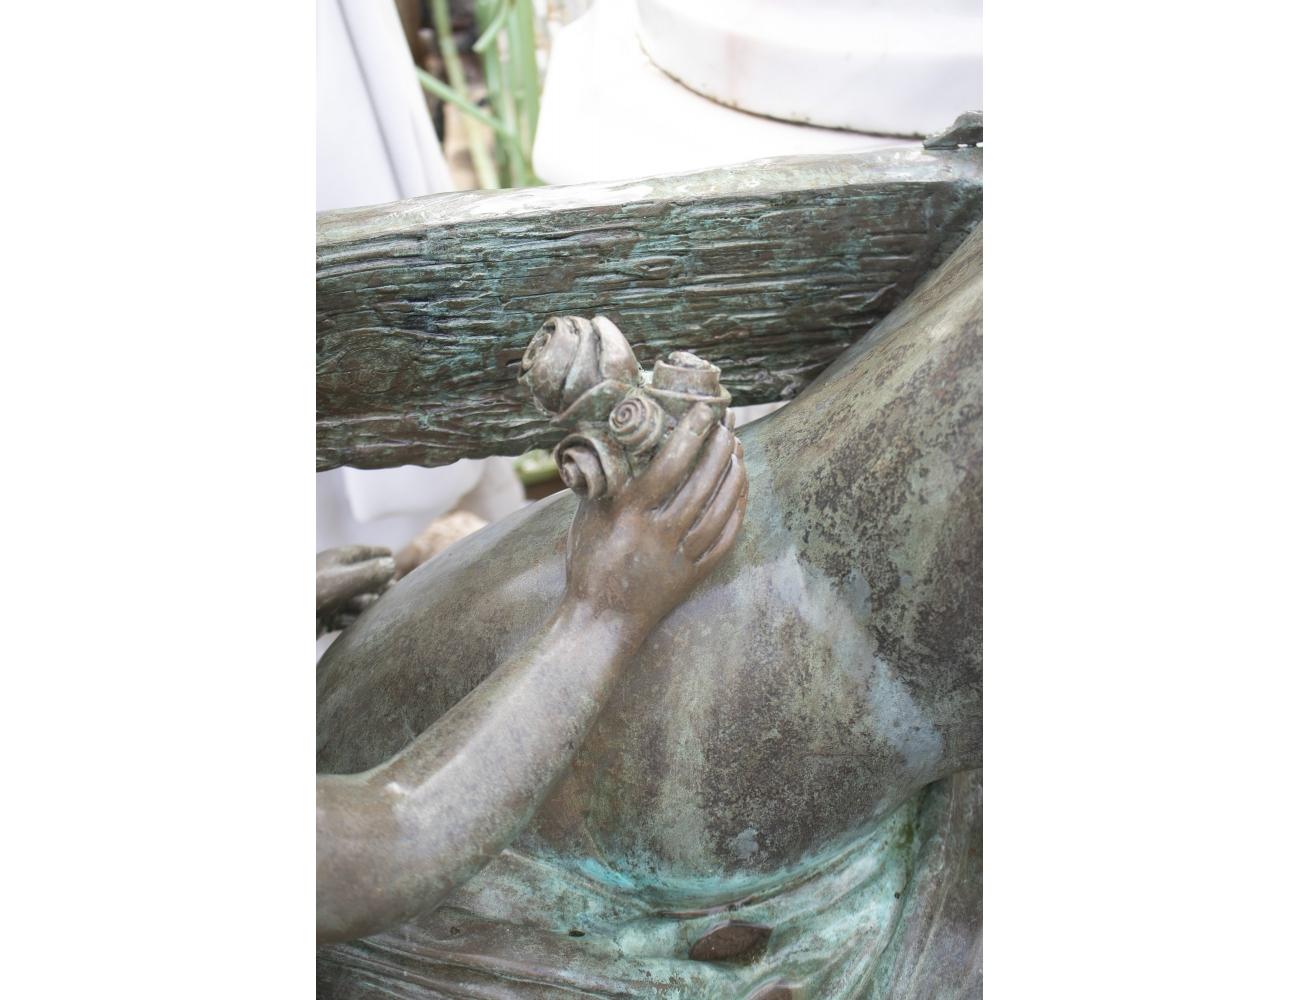 20th Century Bronze Sculpture of a Woman Seated on a Bench with Winged Angels